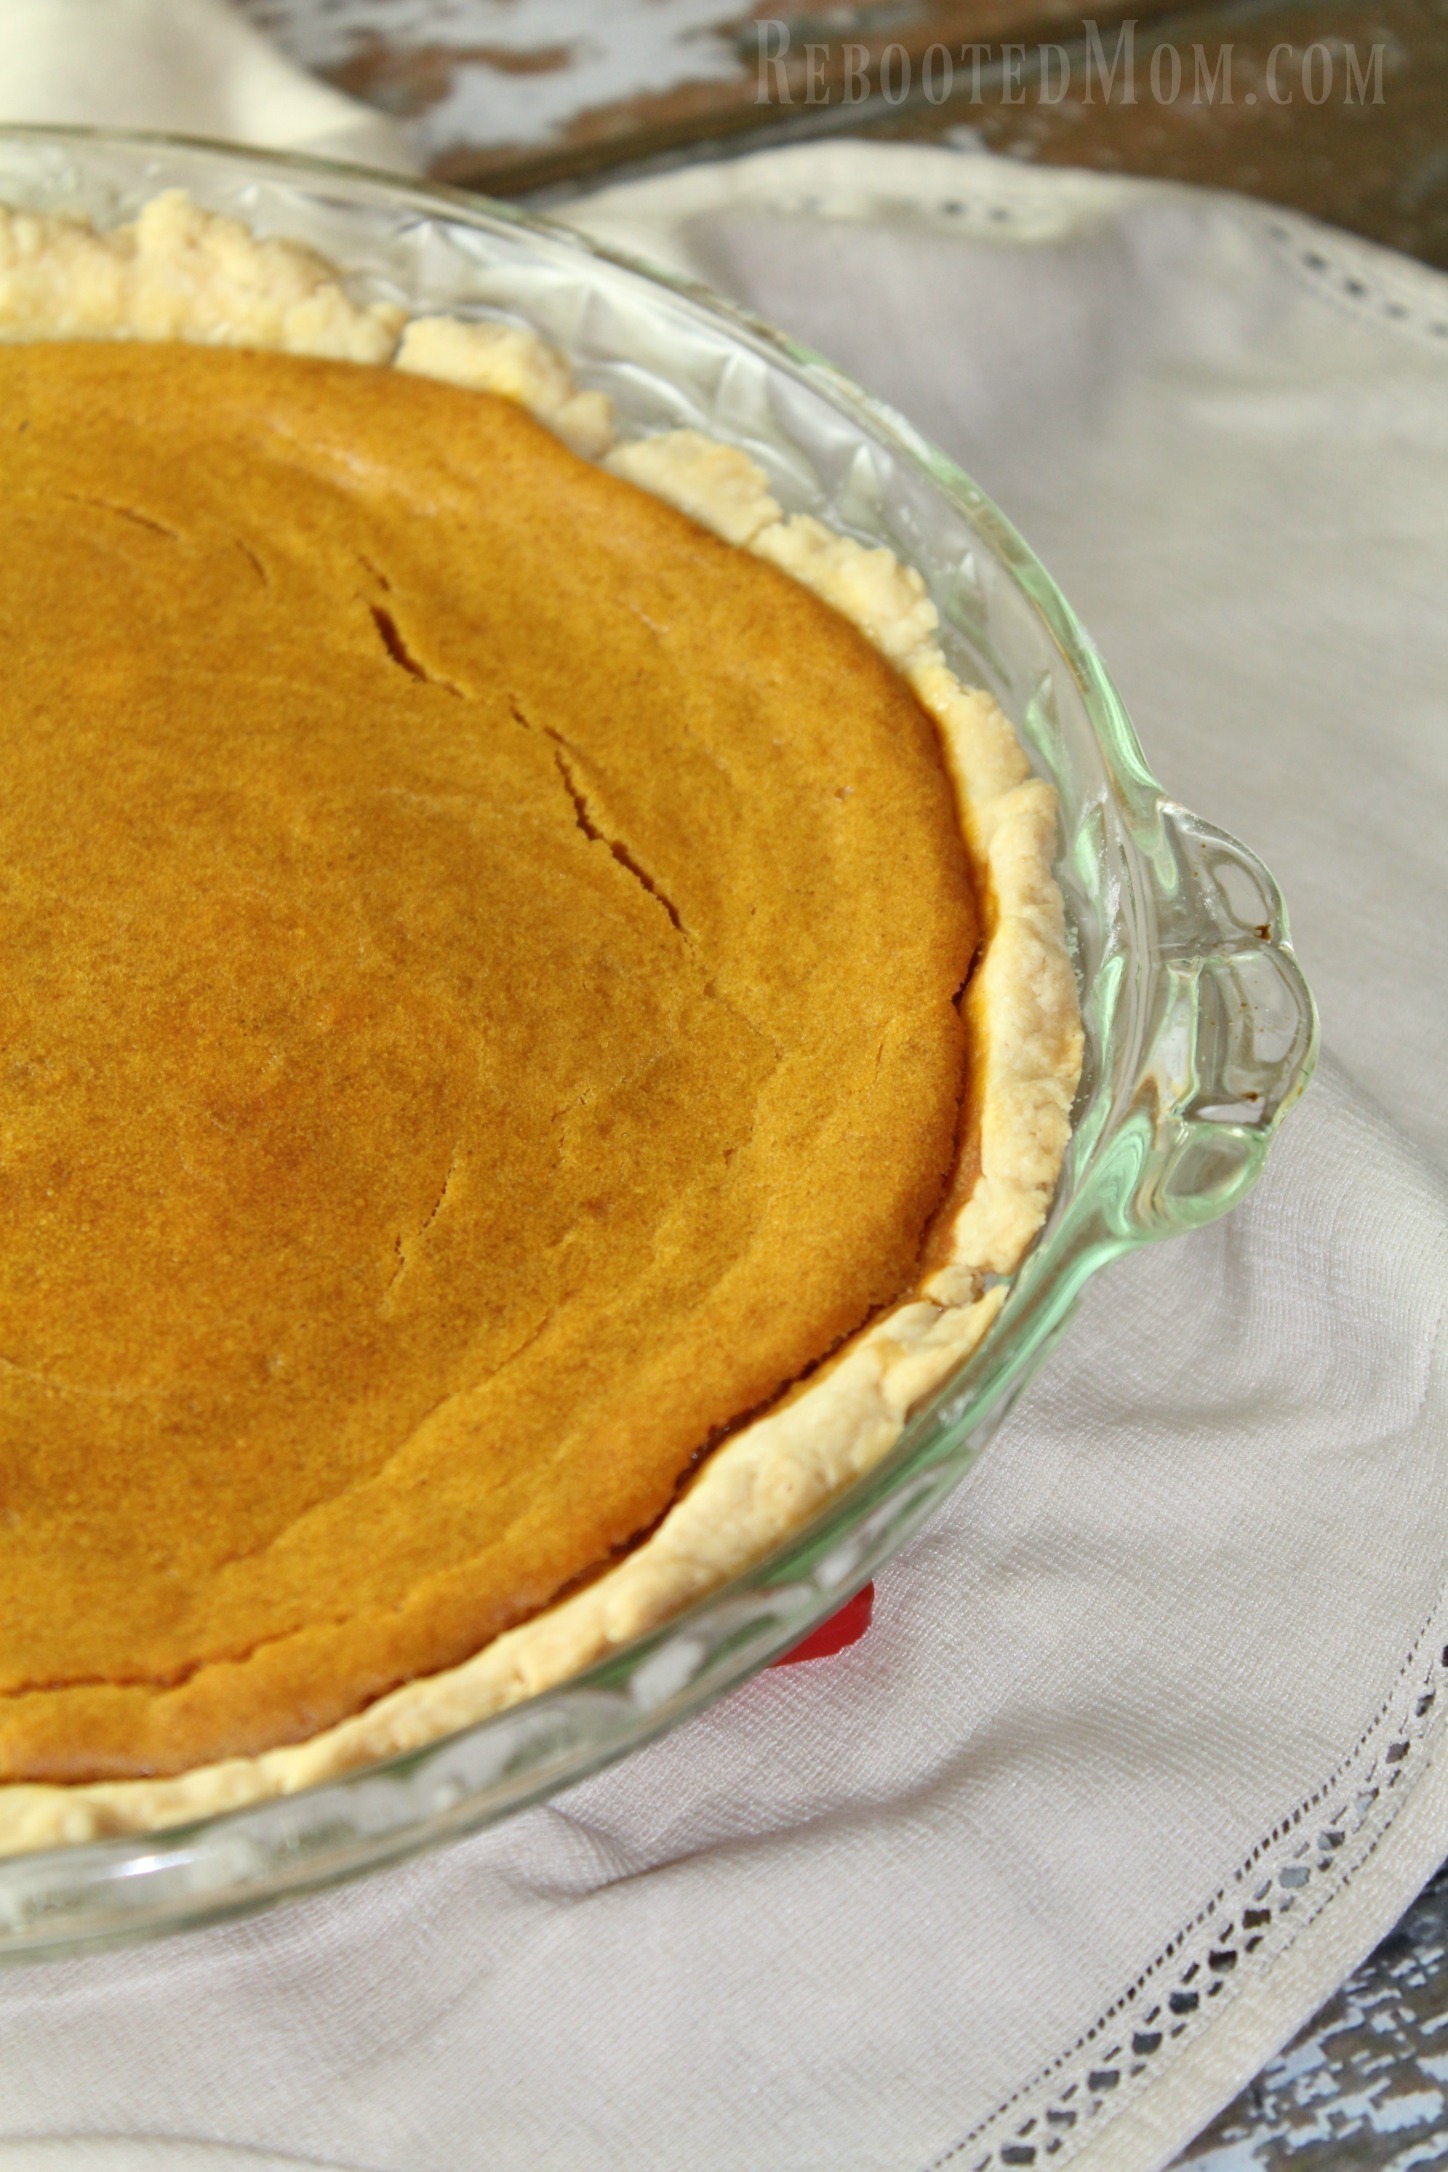 This Coconut Sweet Potato Pie includes maple syrup in lieu of too much sugar, and coconut oil in place of butter - it's absolutely amazing!